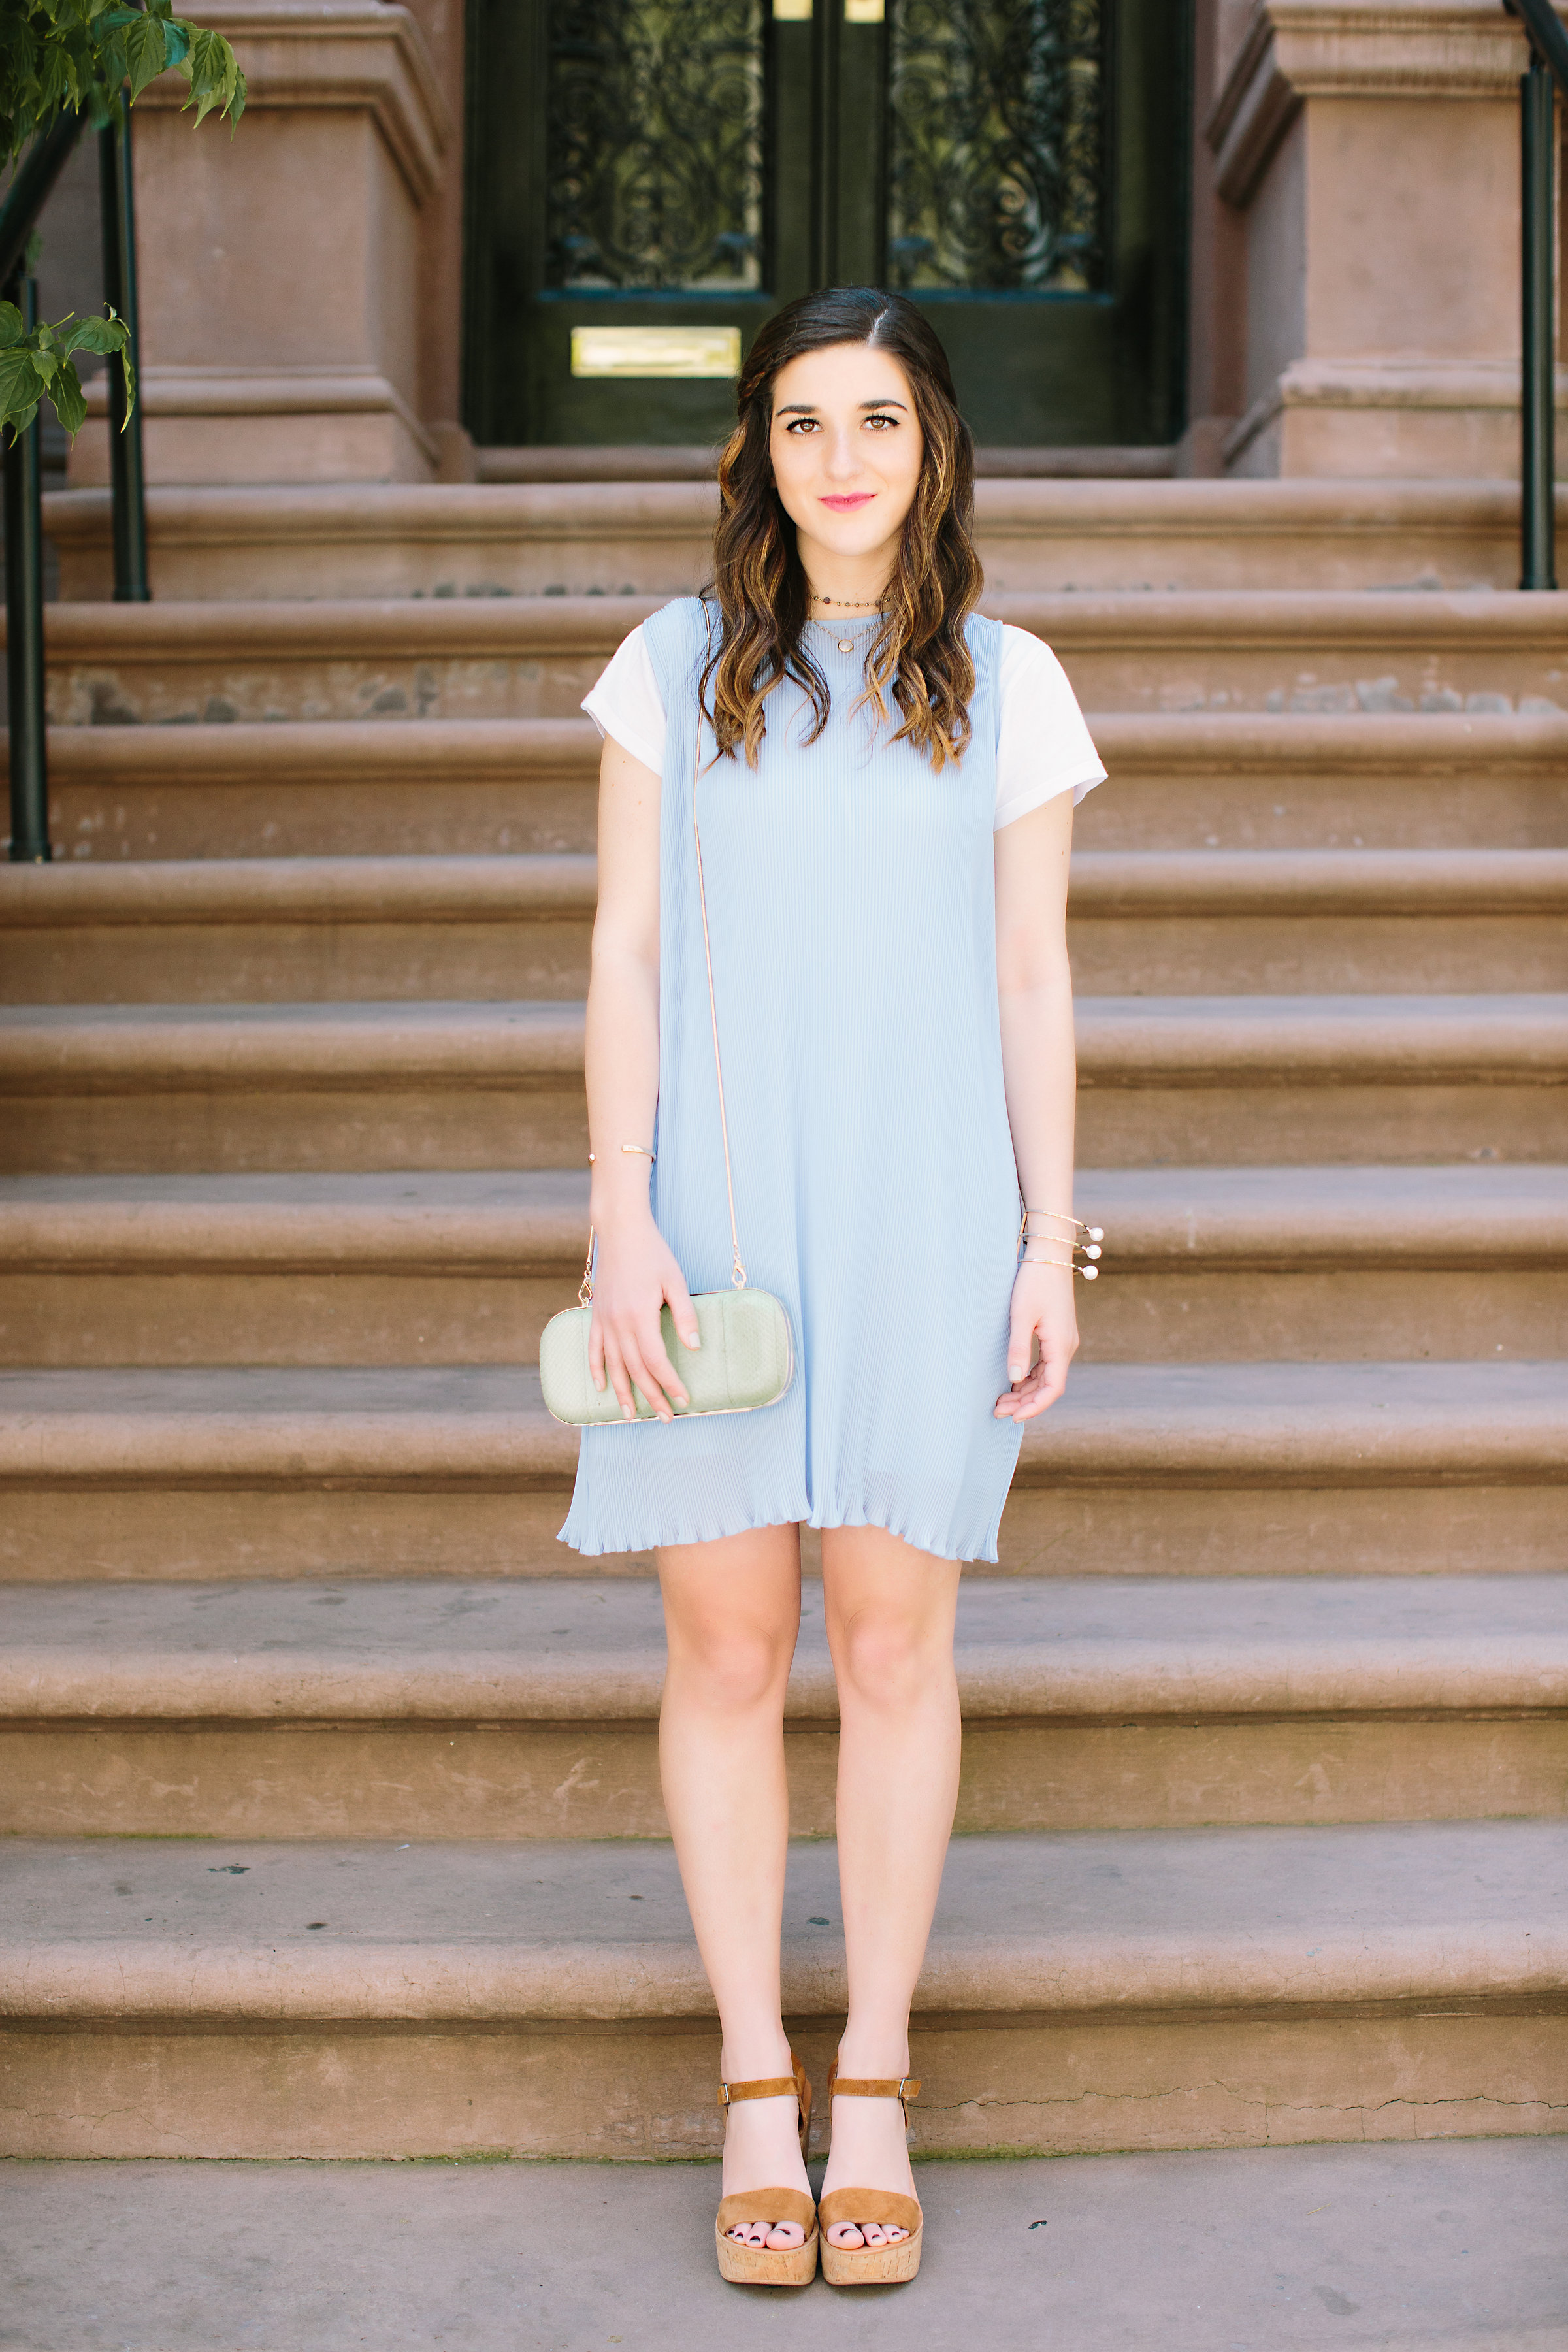 Pastel Blue Pleated Dress Keepsake The Label Louboutins & Love Fashion Blog Esther Santer NYC Street Style Blogger Outfit OOTD Pretty Photoshoot Upper East Side Dolce Vita Wedges Clutch Club Monaco Gold Jewelry Women White Tee Shirt Inspo Summer Look.jpg